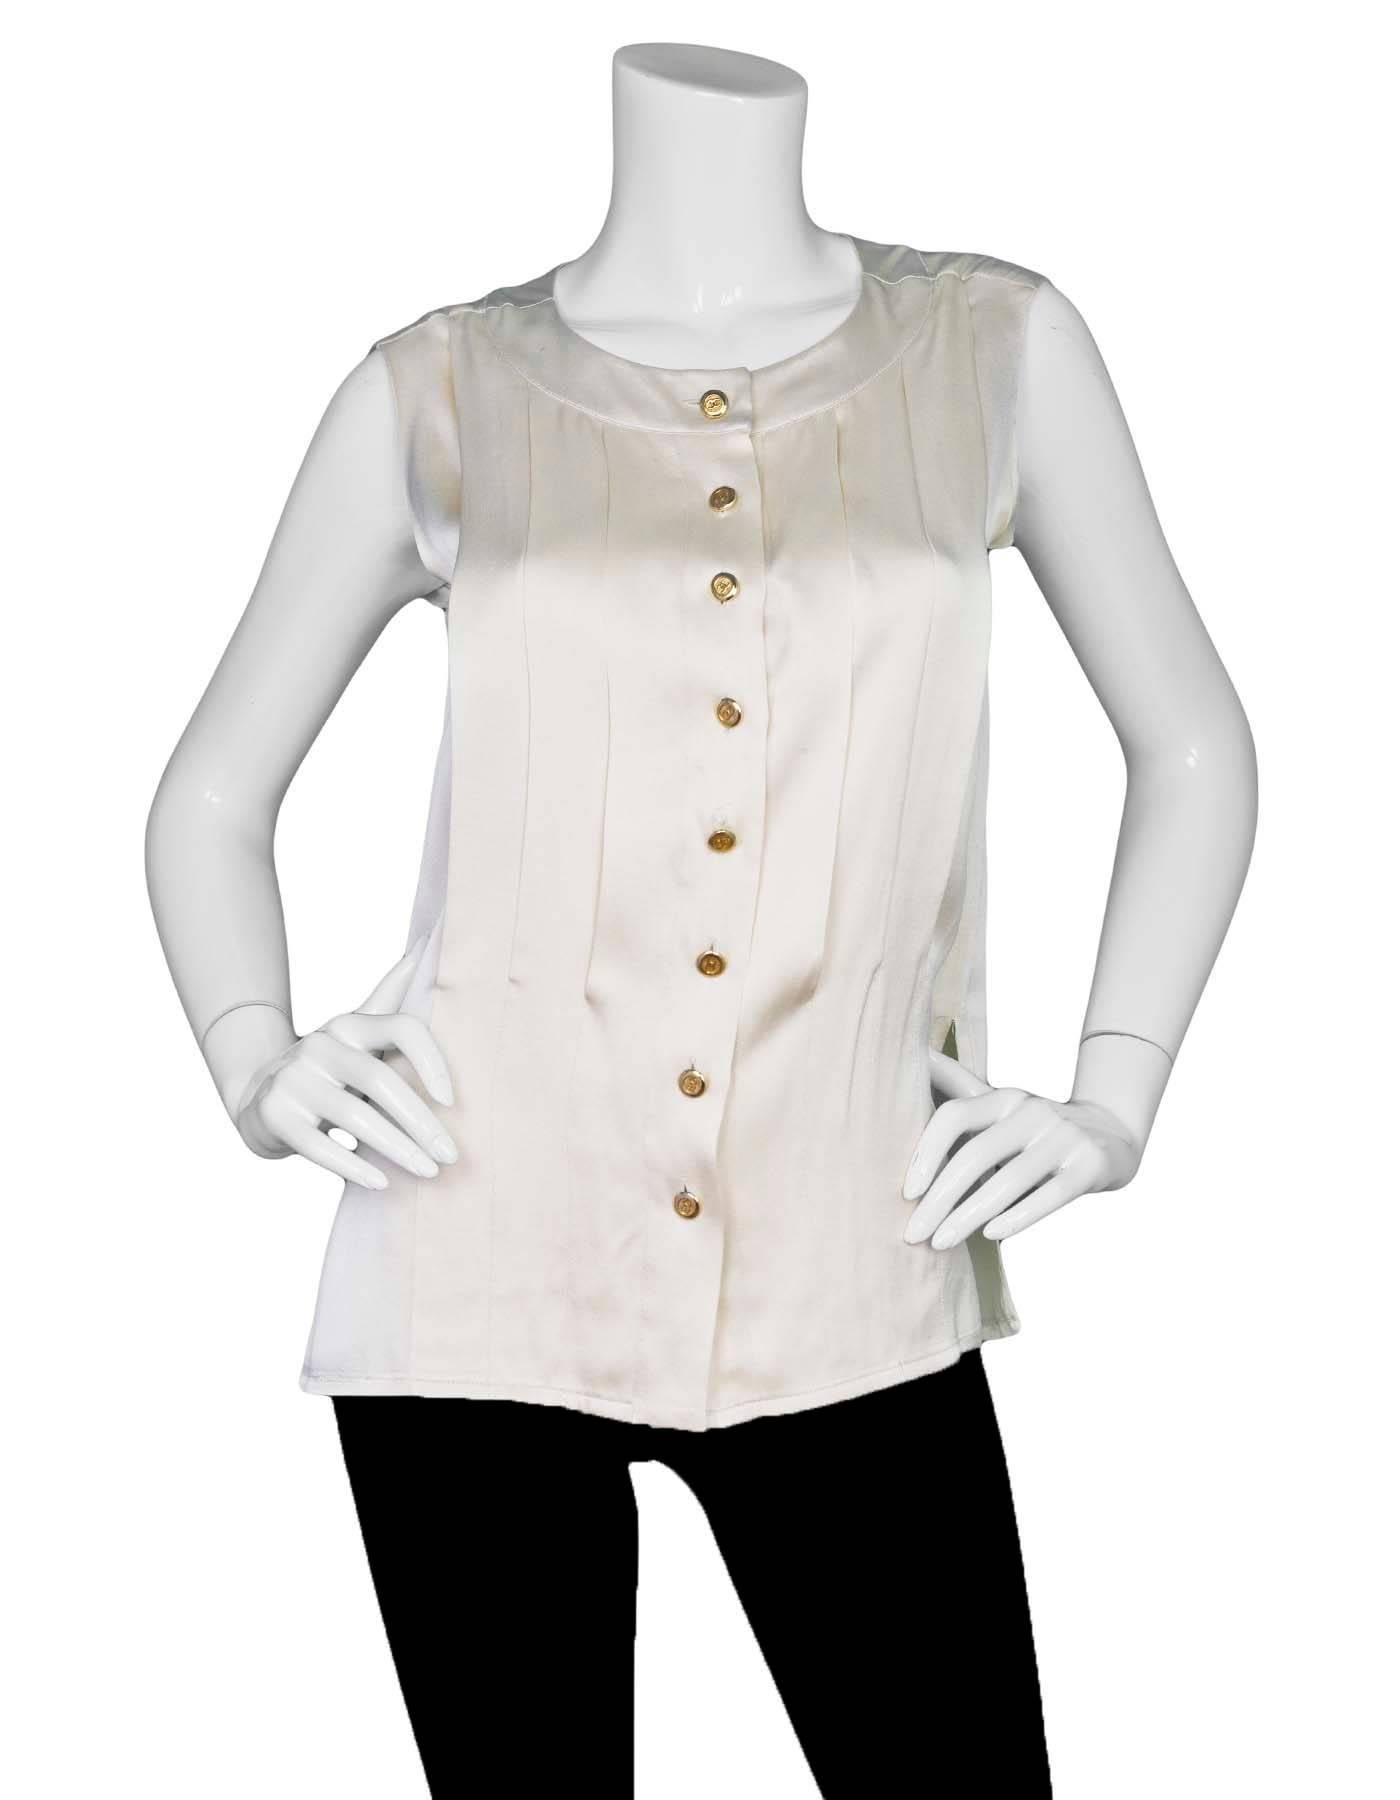 Chanel Cream Silk Pleated Button Down Top

Color: Cream
Composition: Not given-believed to be 100% silk
Lining: None
Closure/Opening: Button down front
Exterior Pockets: None
Interior Pockets: None
Overall Condition: Good vintage, pre-owned